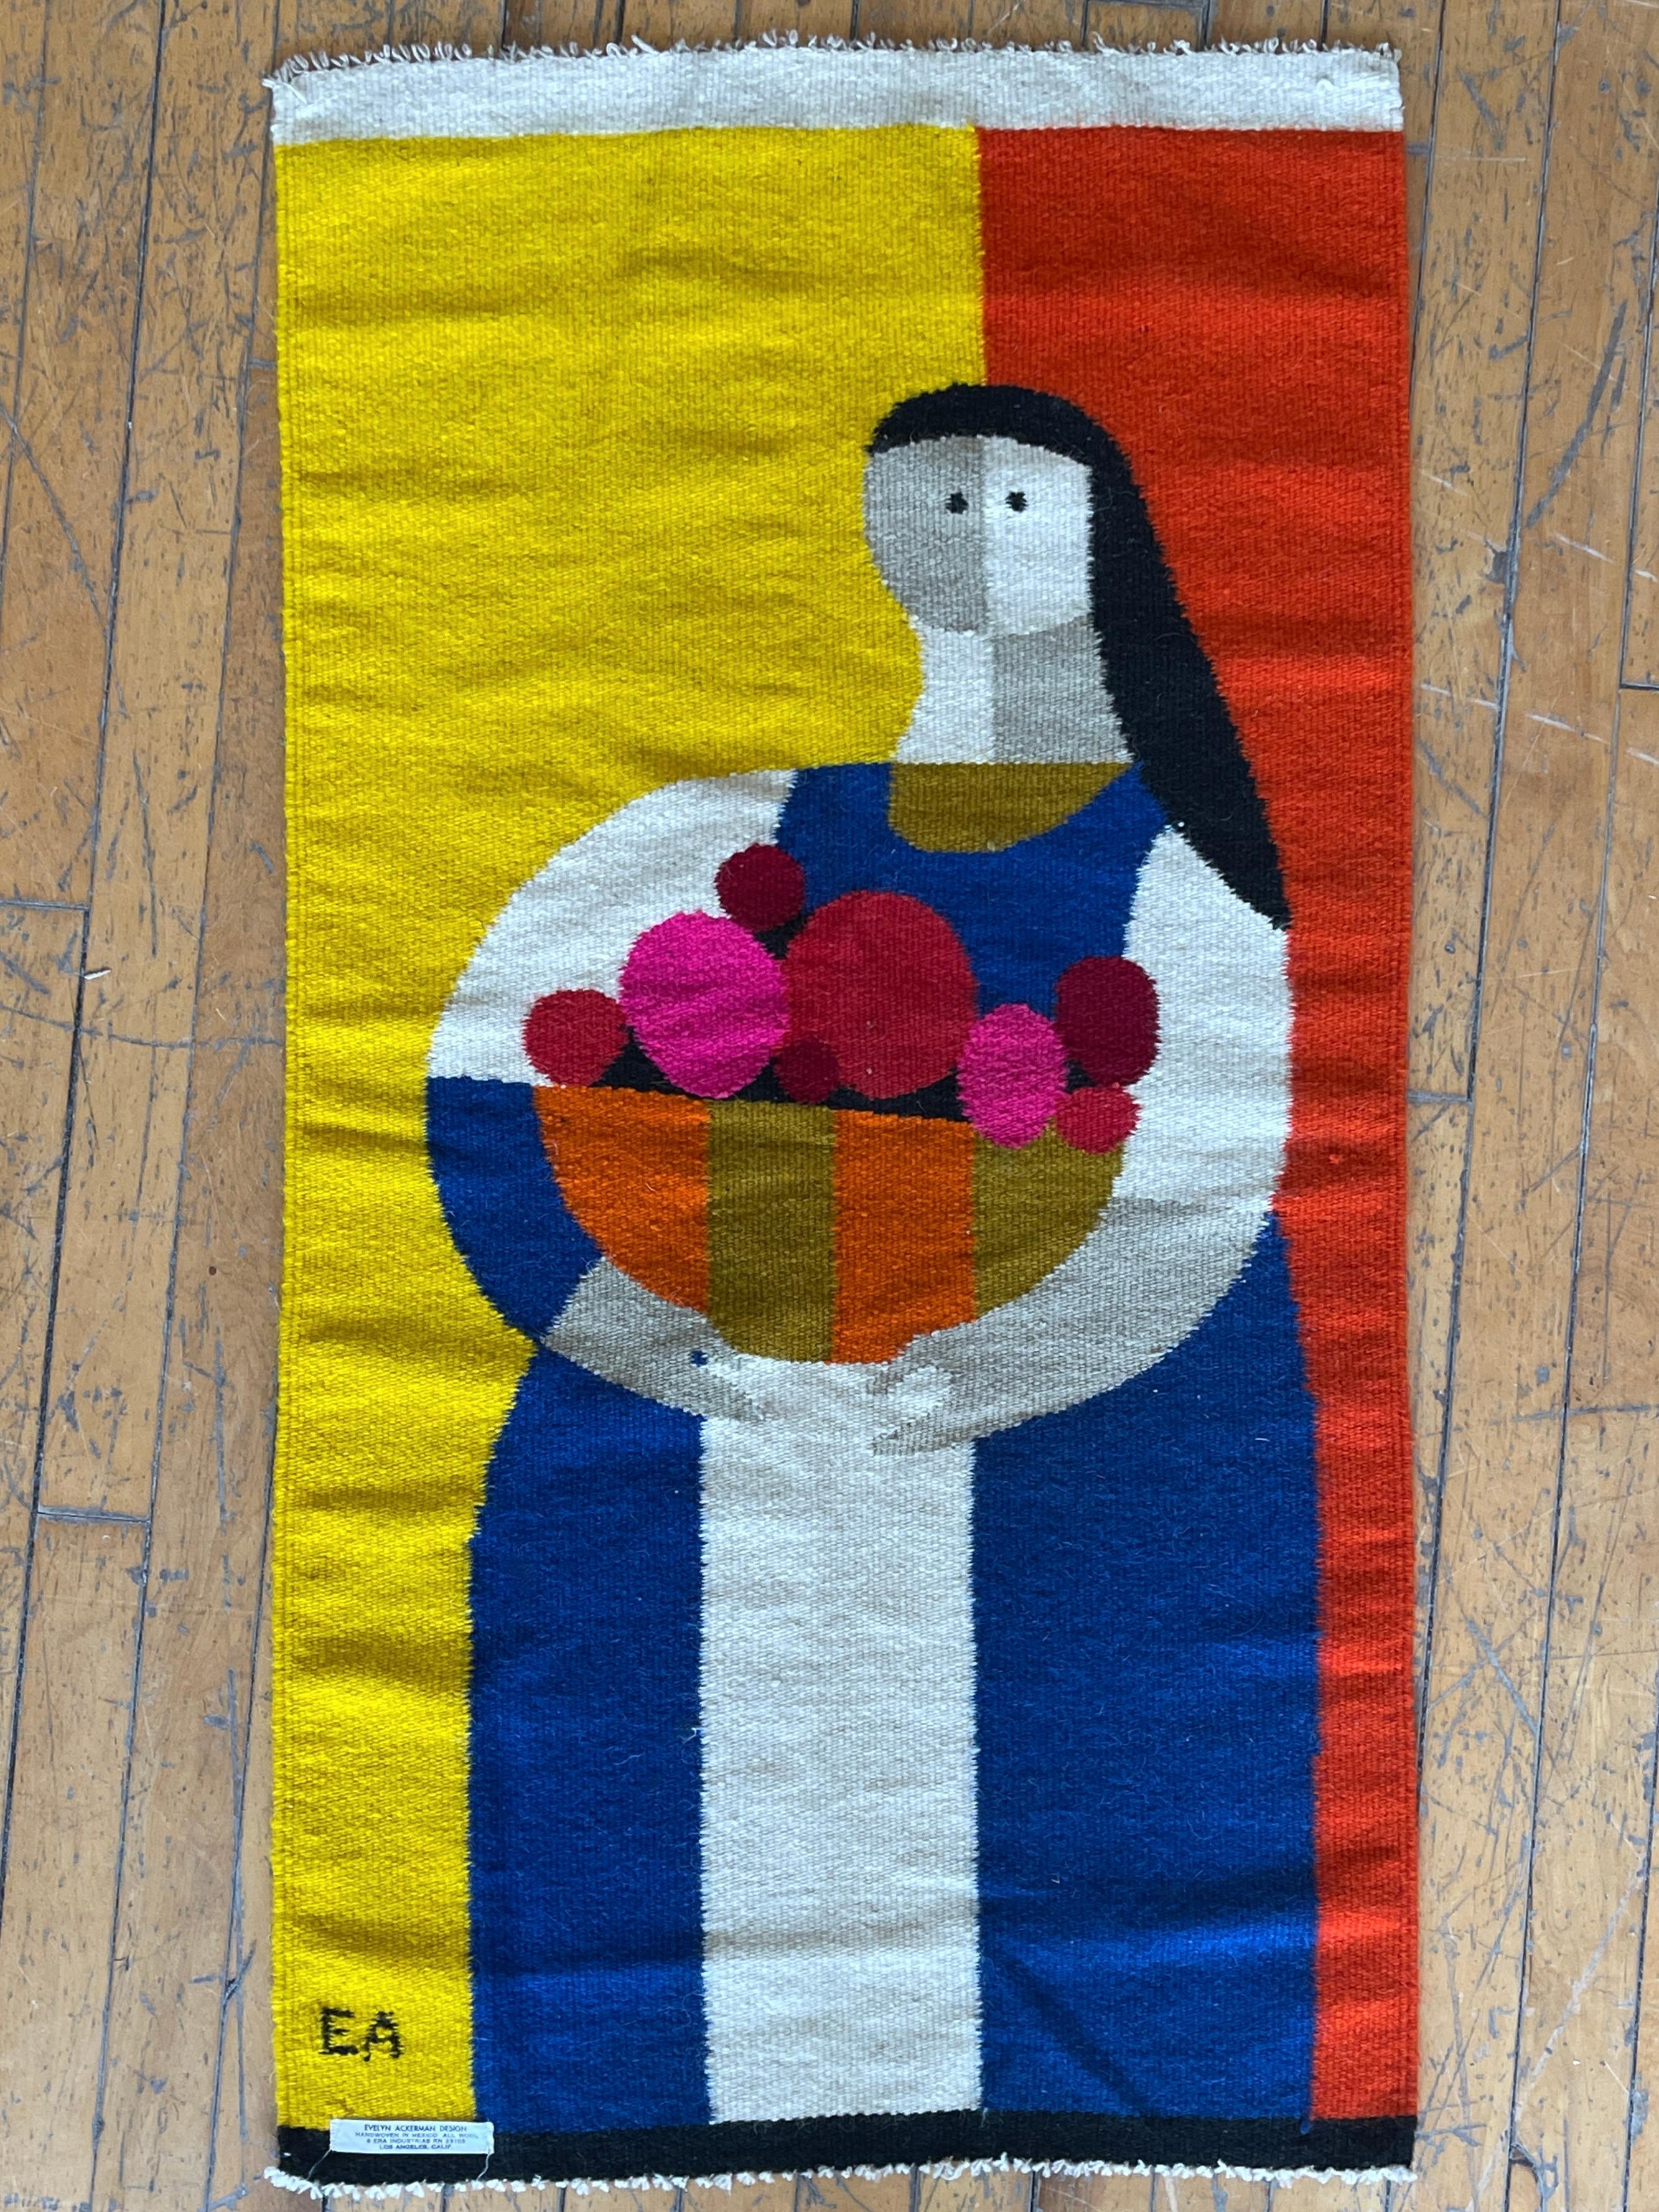 20th Century Stunning Evelyn Ackerman Design Vibrant Wool Wall Hanging Tapestry 'Campasena'